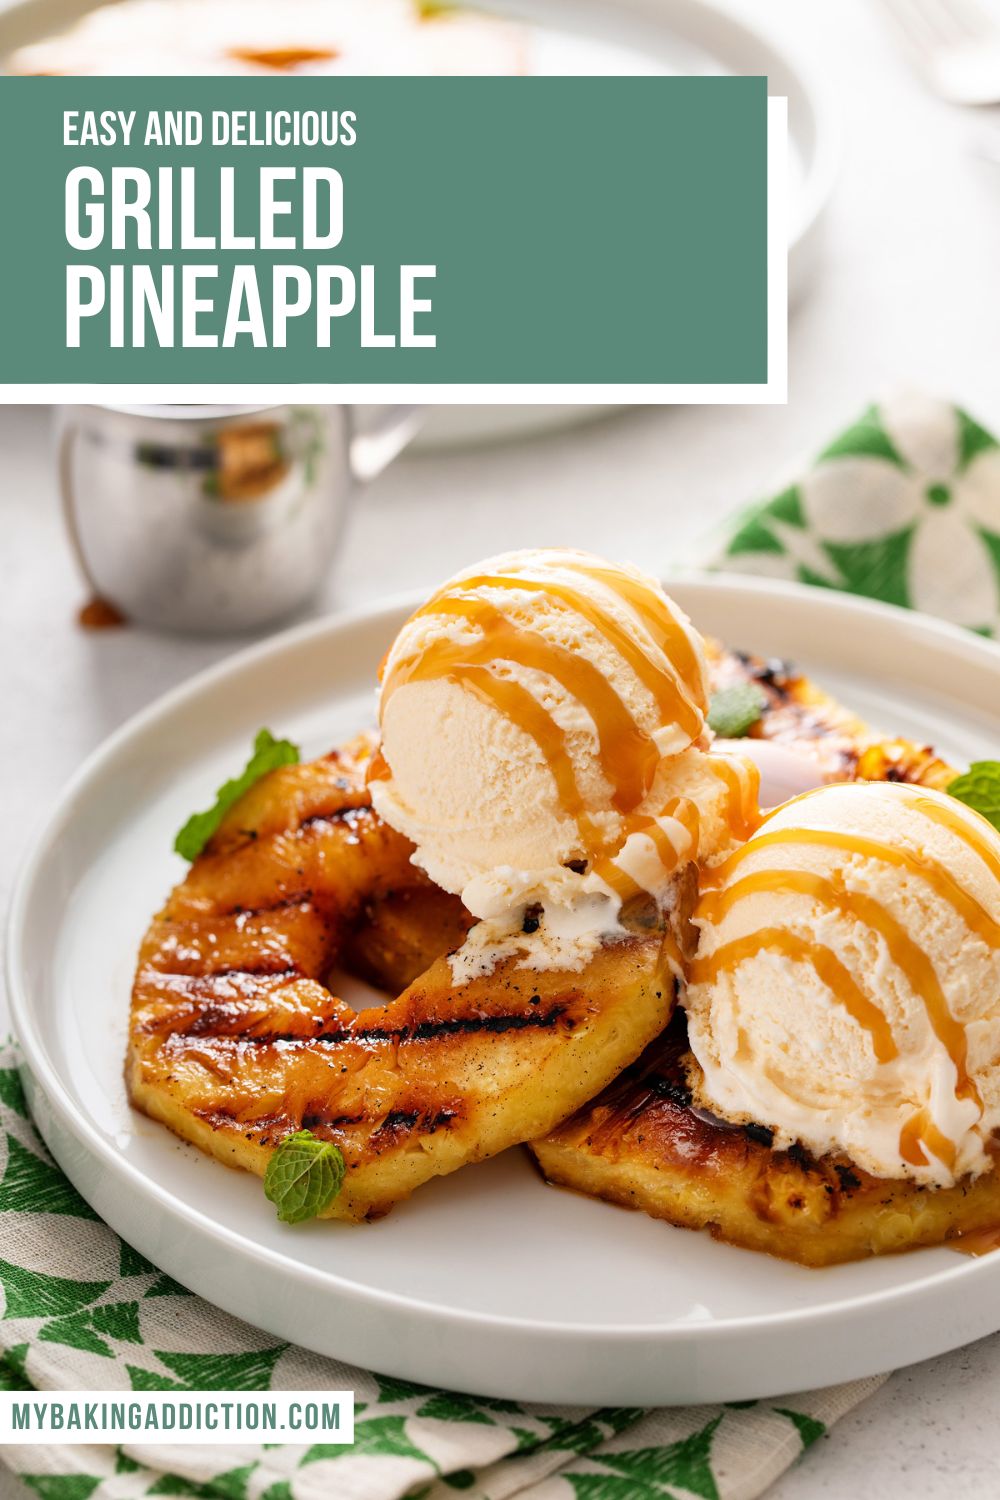 Slices of grilled pineapple topped with vanilla ice cream and drizzled with caramel sauce. Text overlay includes recipe name.